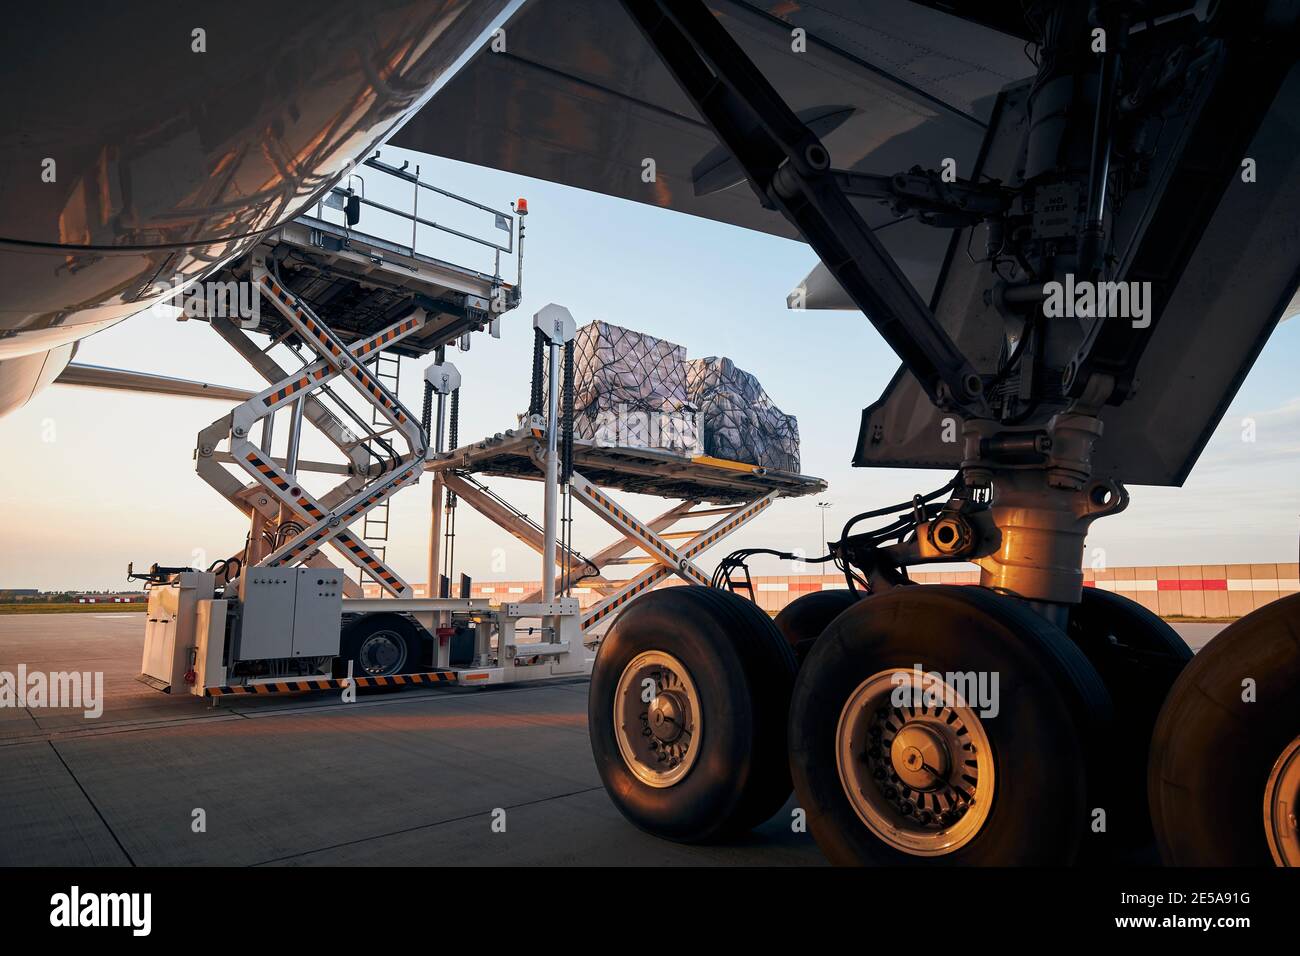 Loading of cargo containers to plane at airport. Ground handling preparing freight airplane before flight. Stock Photo